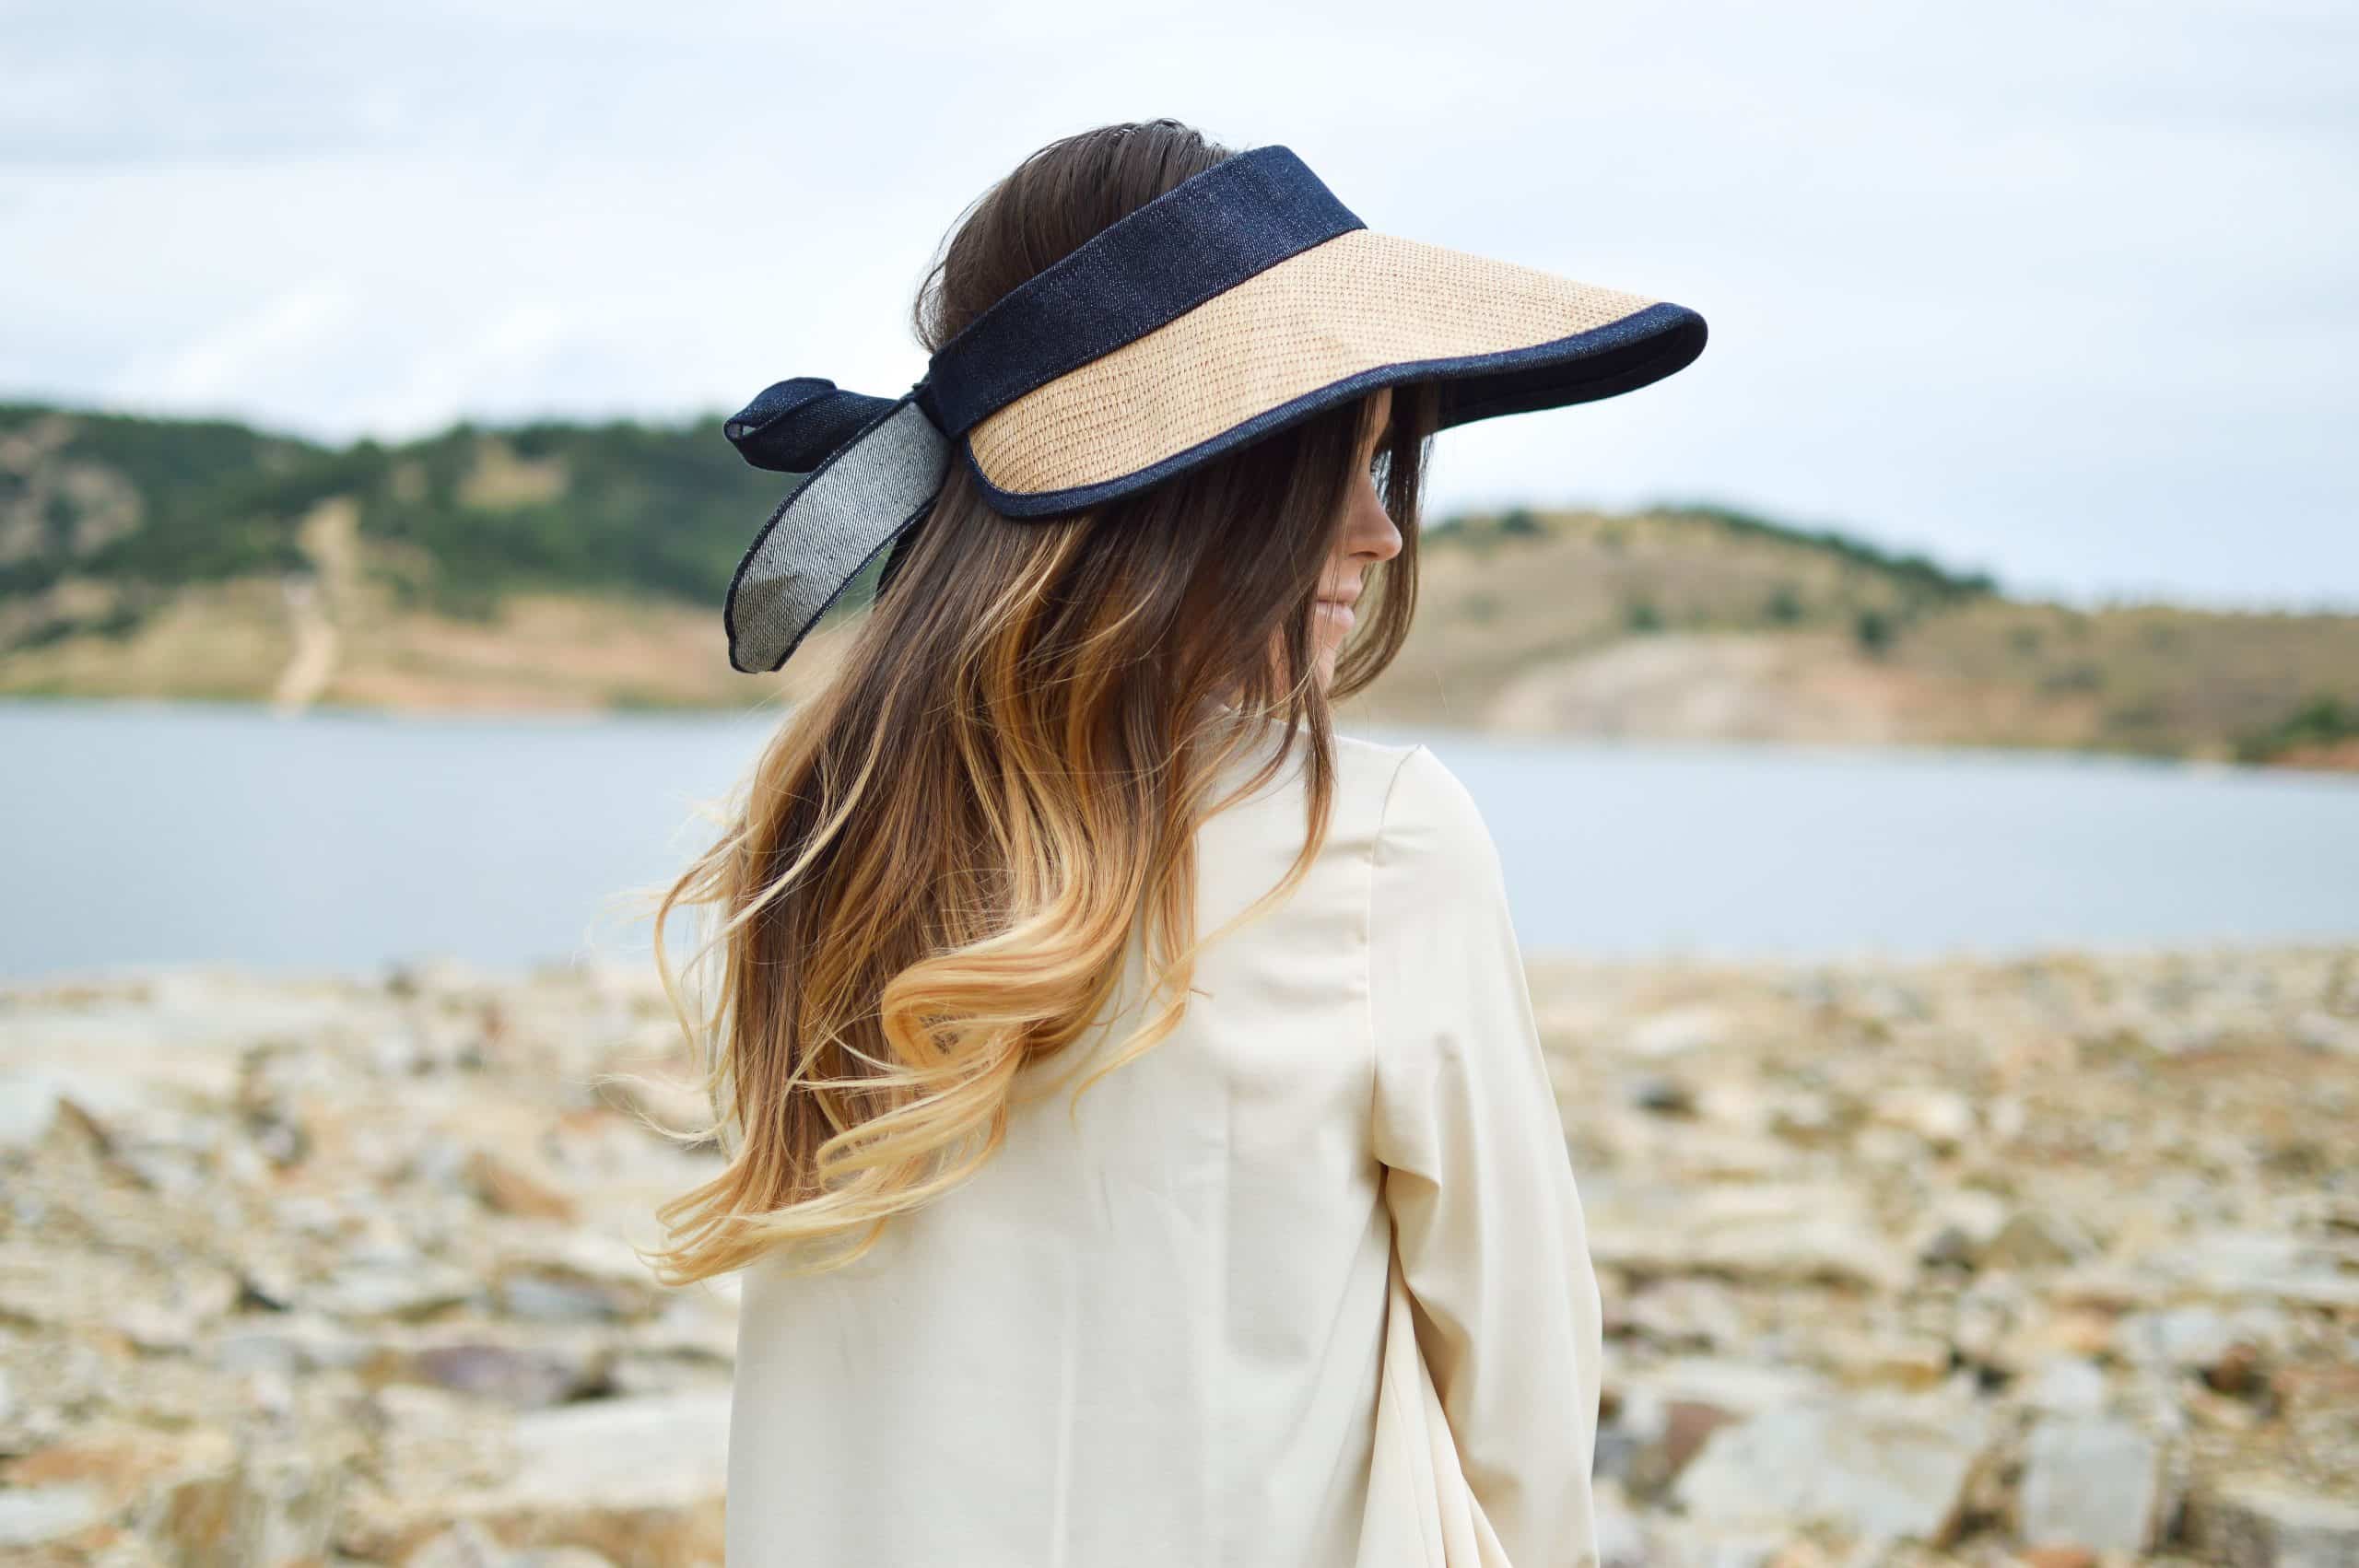 Project Skin Vancouver Sunhat